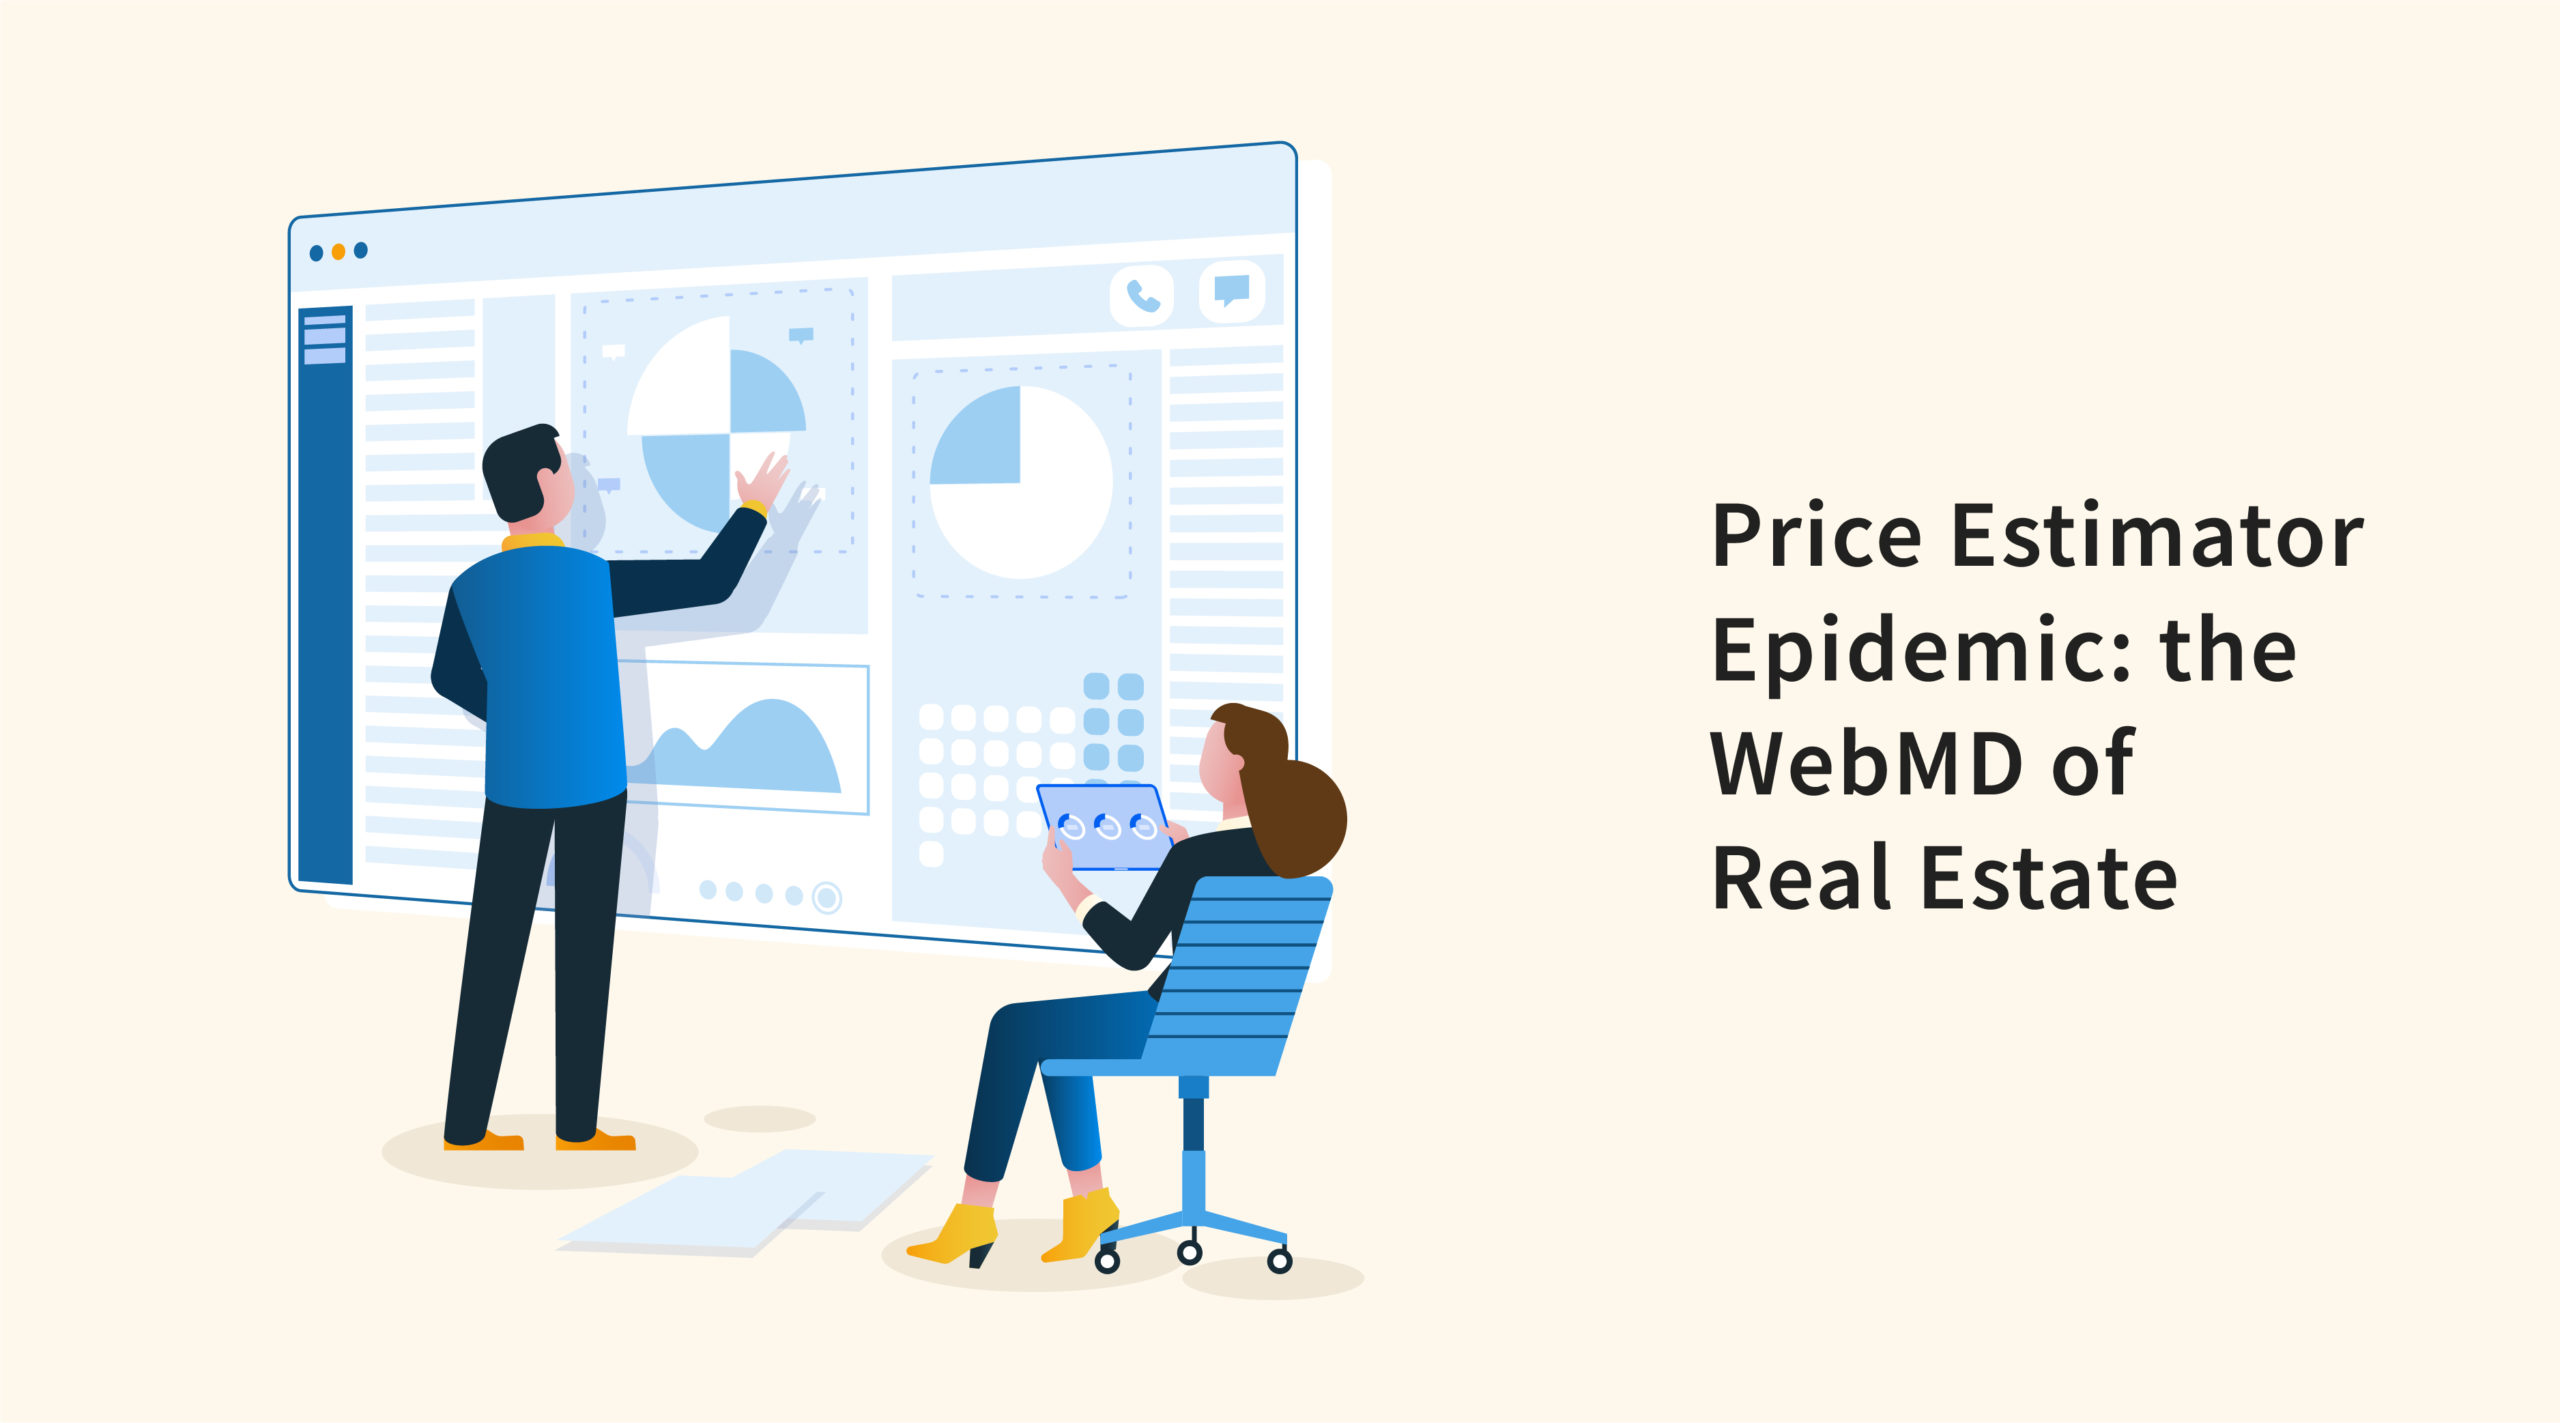 The Price Estimator Epidemic: the WebMD of Real Estate Featured Image